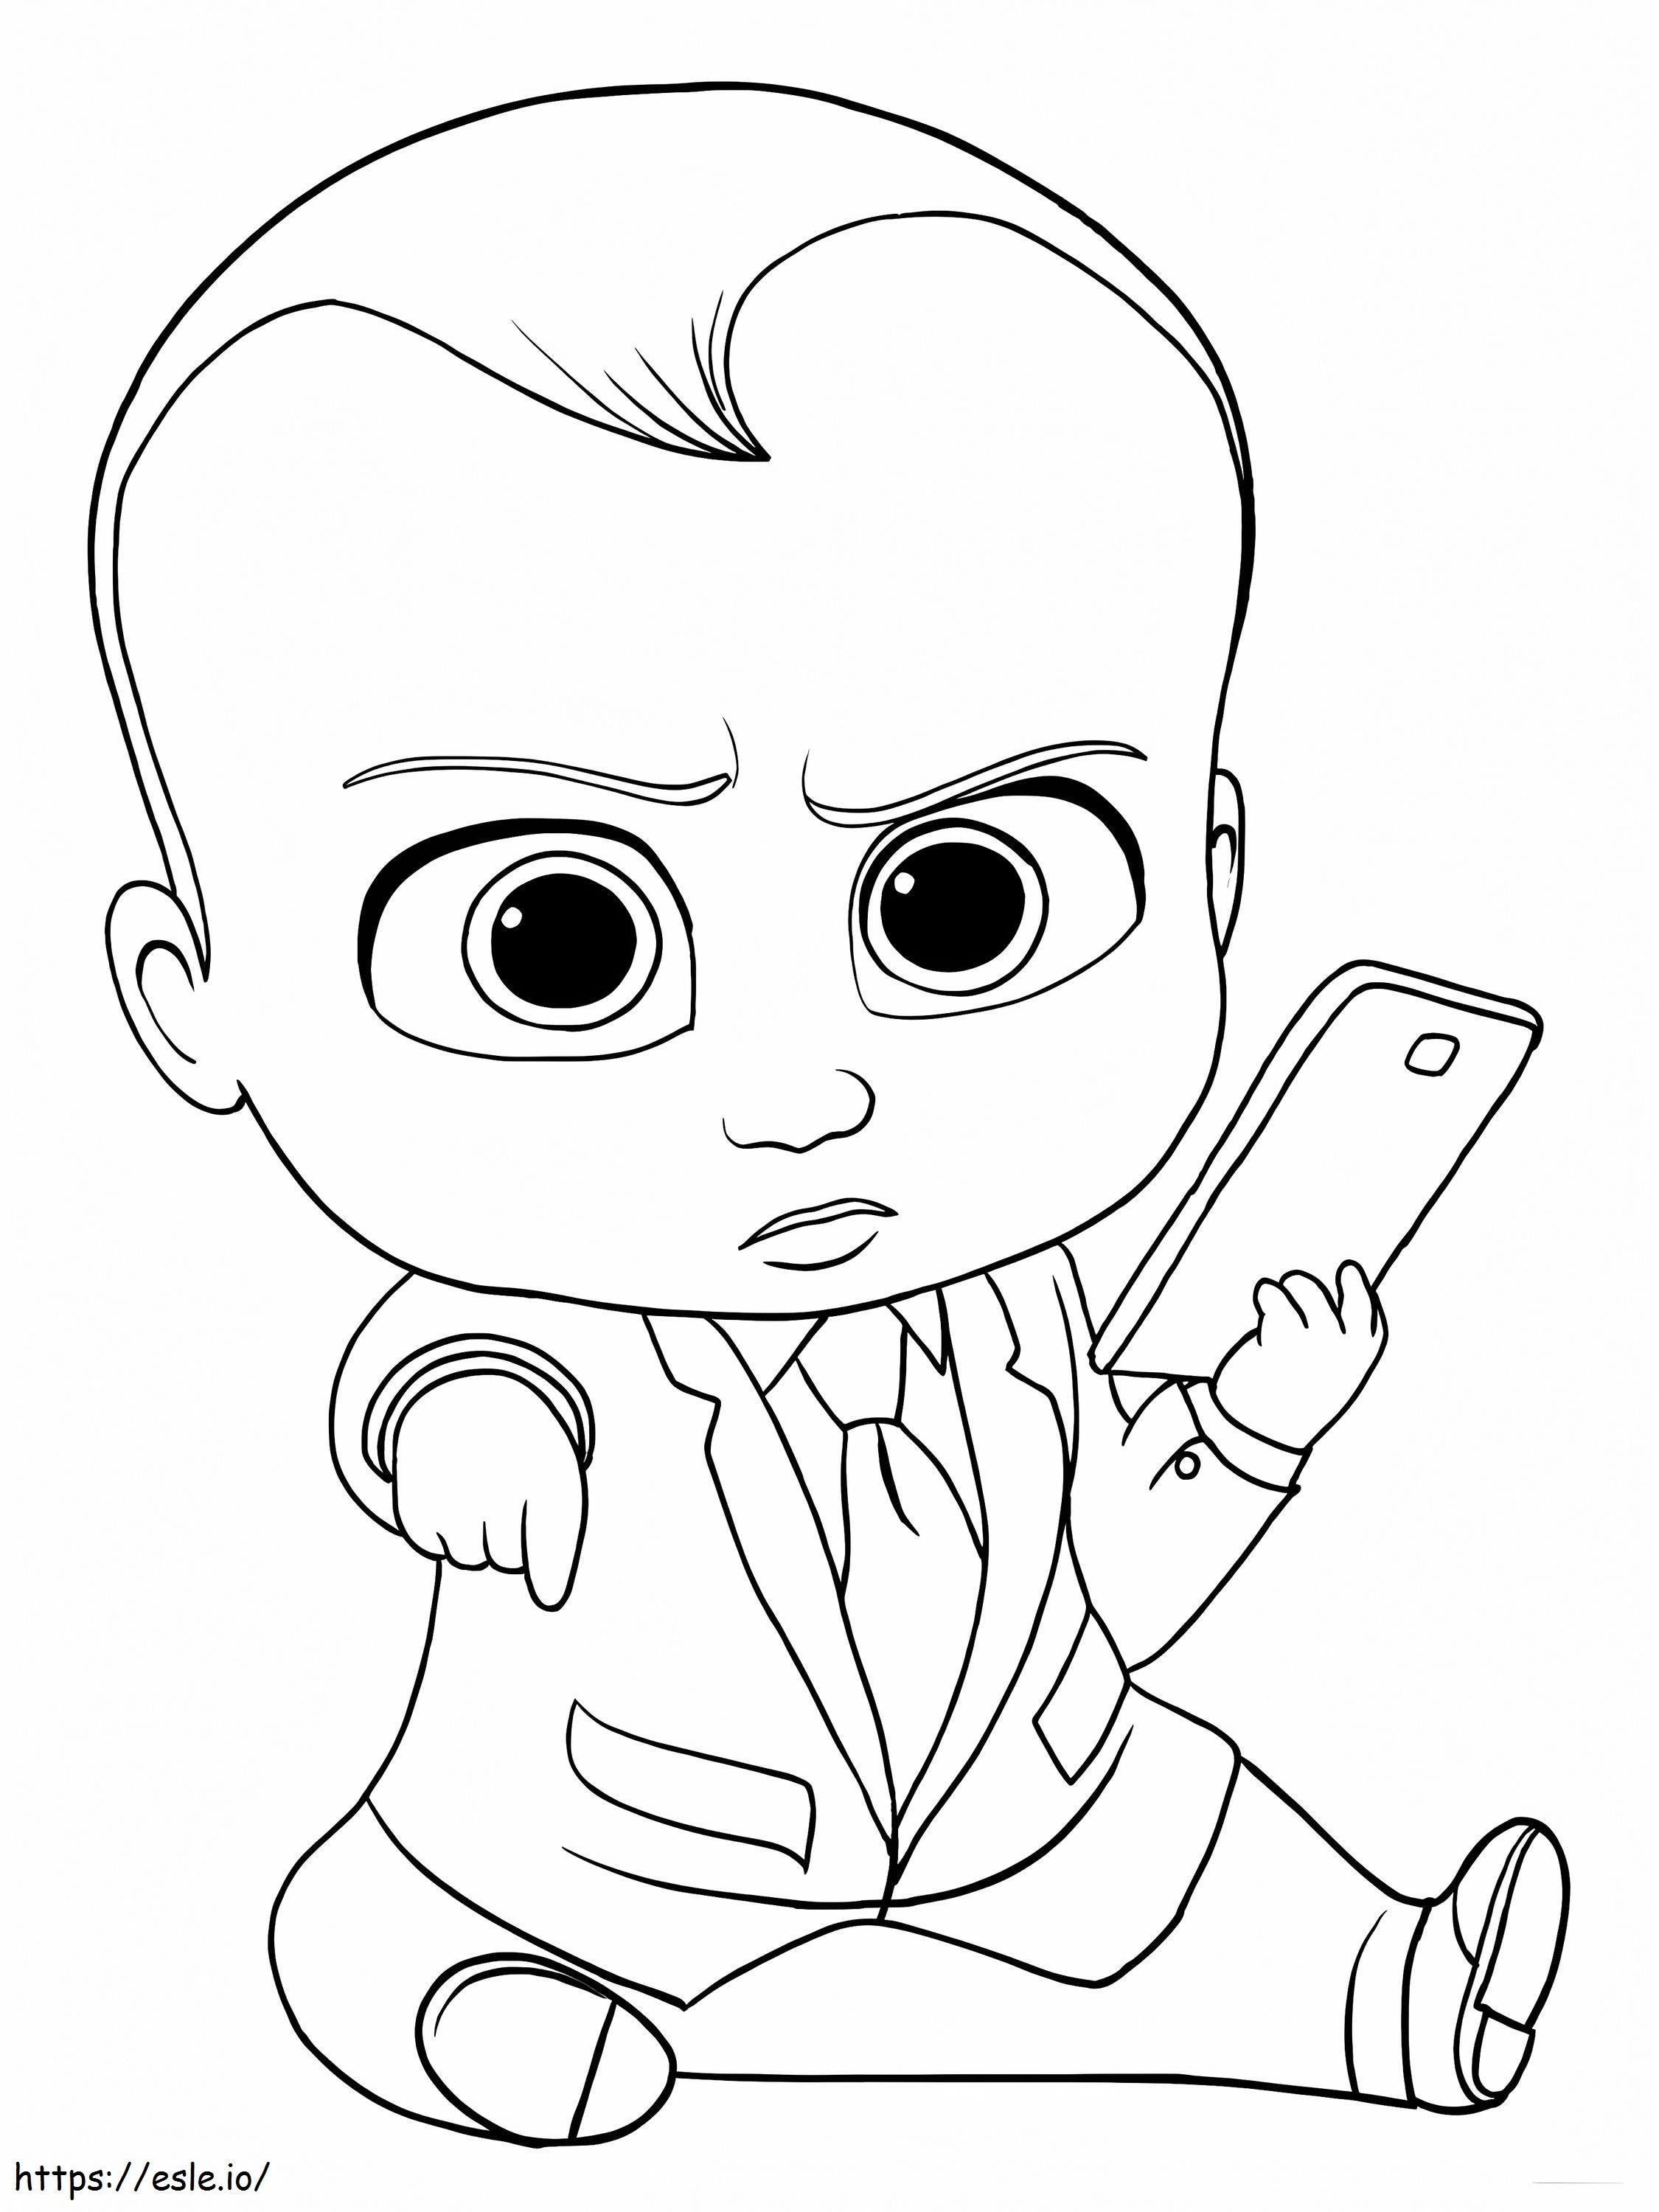 1541985493 1539564141 Boss Baby 15 coloring page